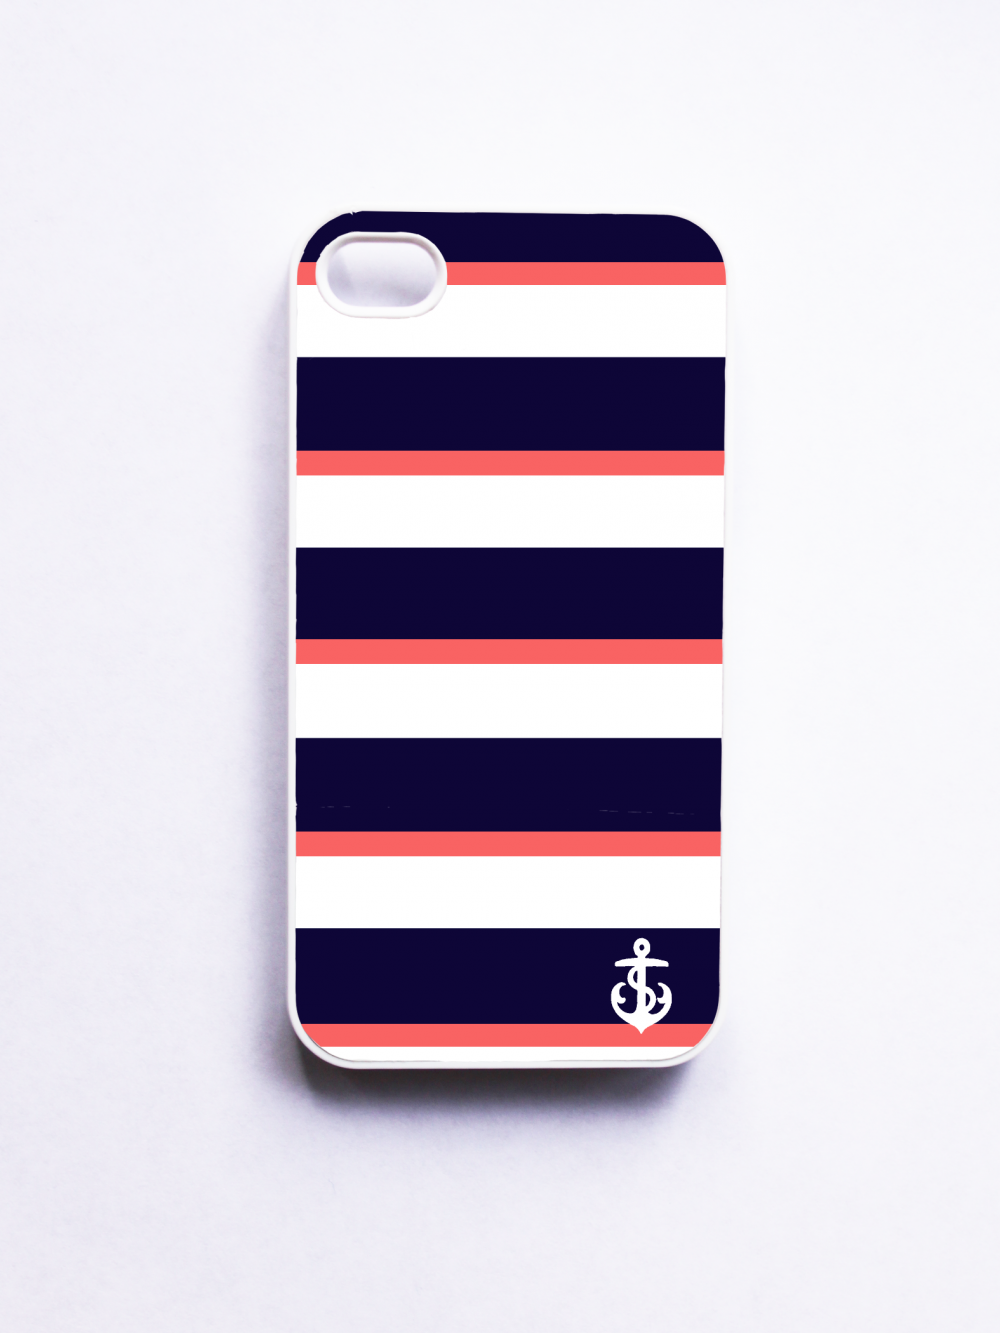 Nautical Iphone 4 Case For Iphone 4 / 4s - Navy & Coral Stripe With Anchor